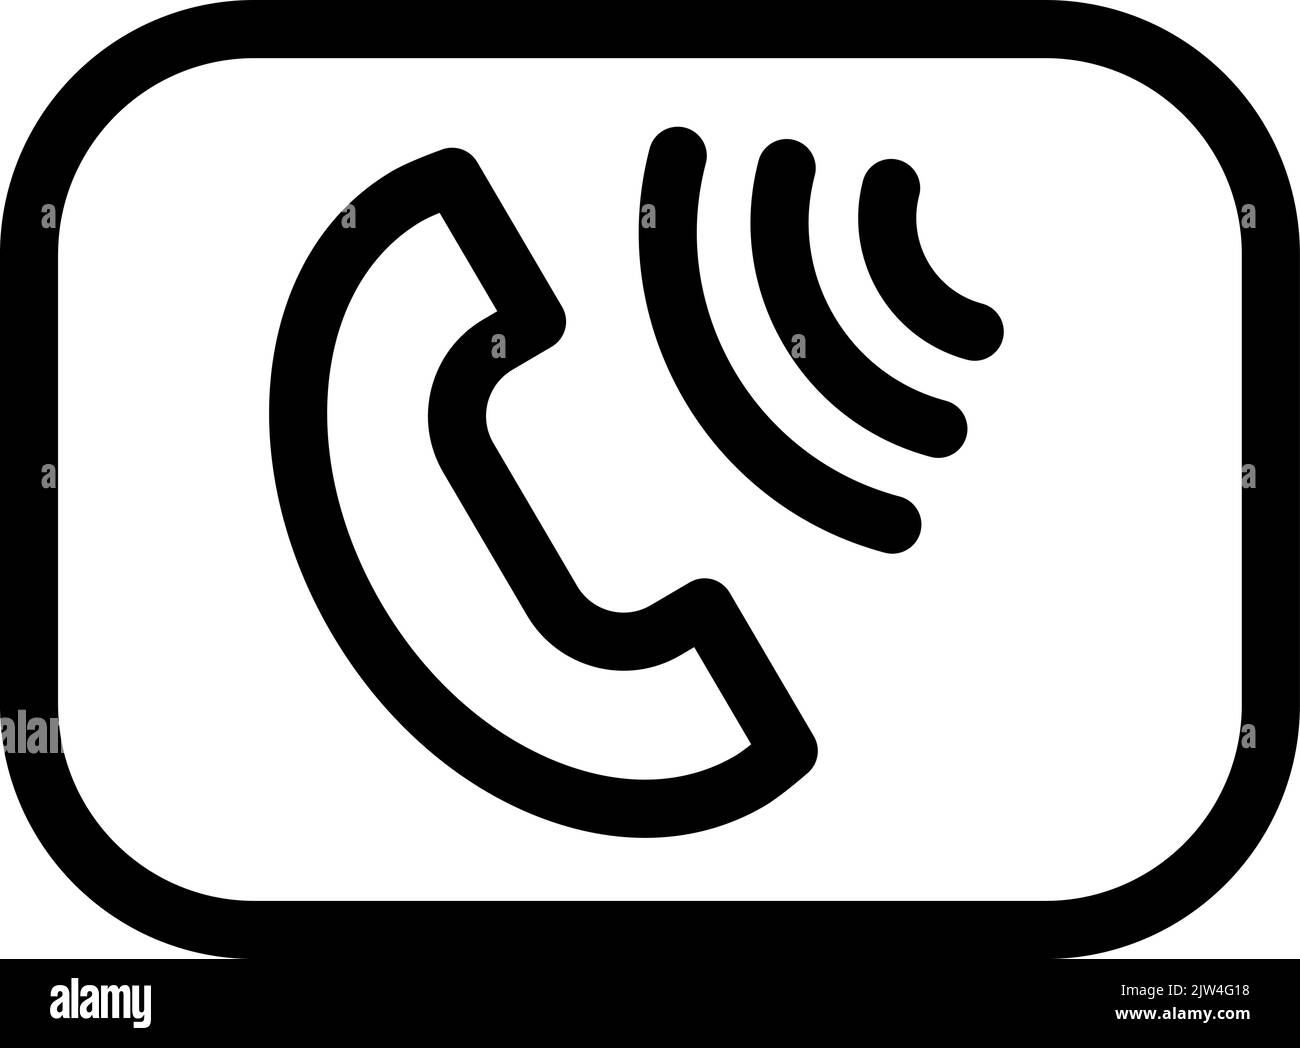 incoming call icon android